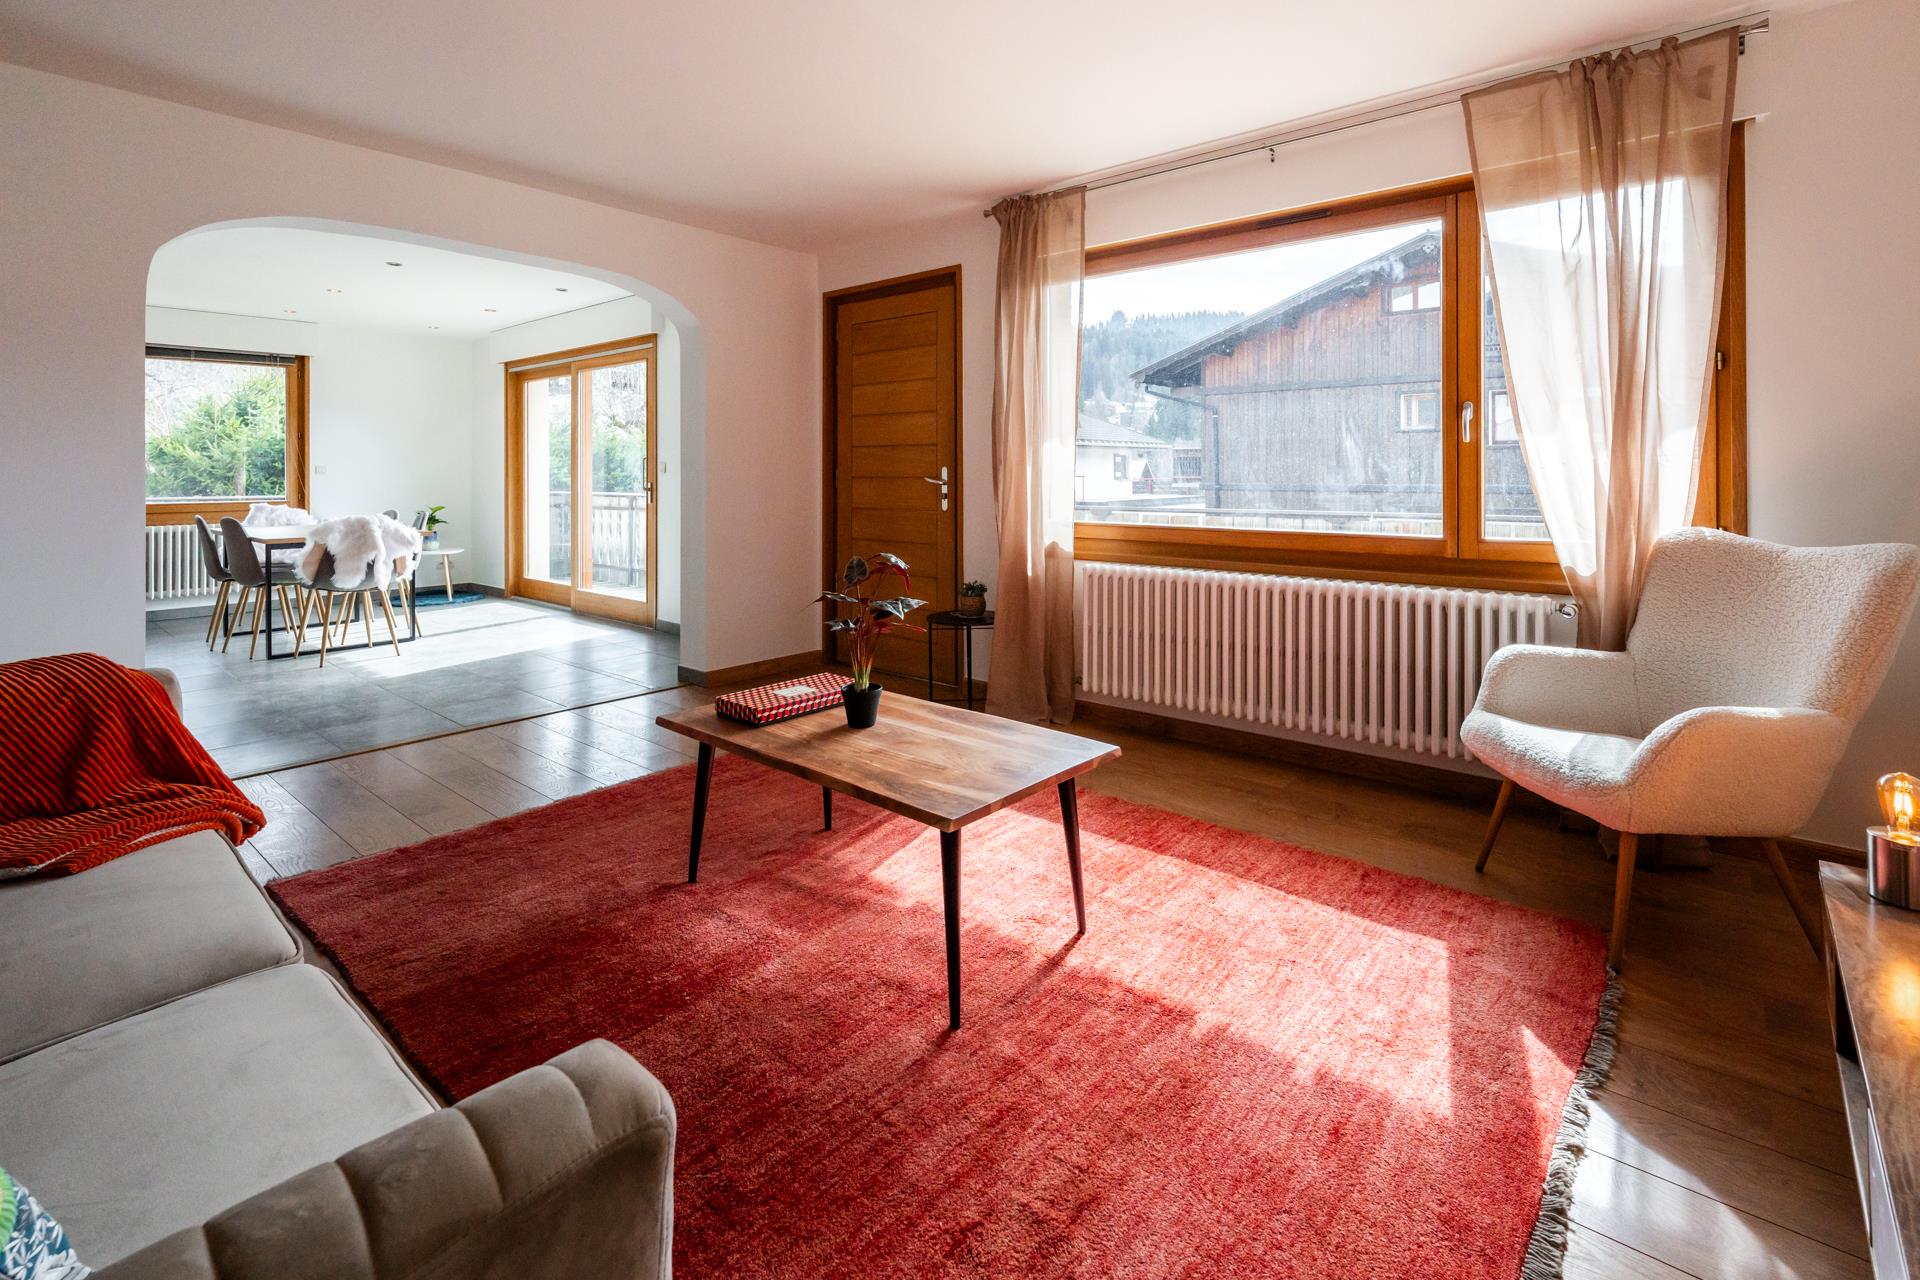 Ideally located 113 m² appartment in the heart of the alpine village of Les Gets with superb mountai